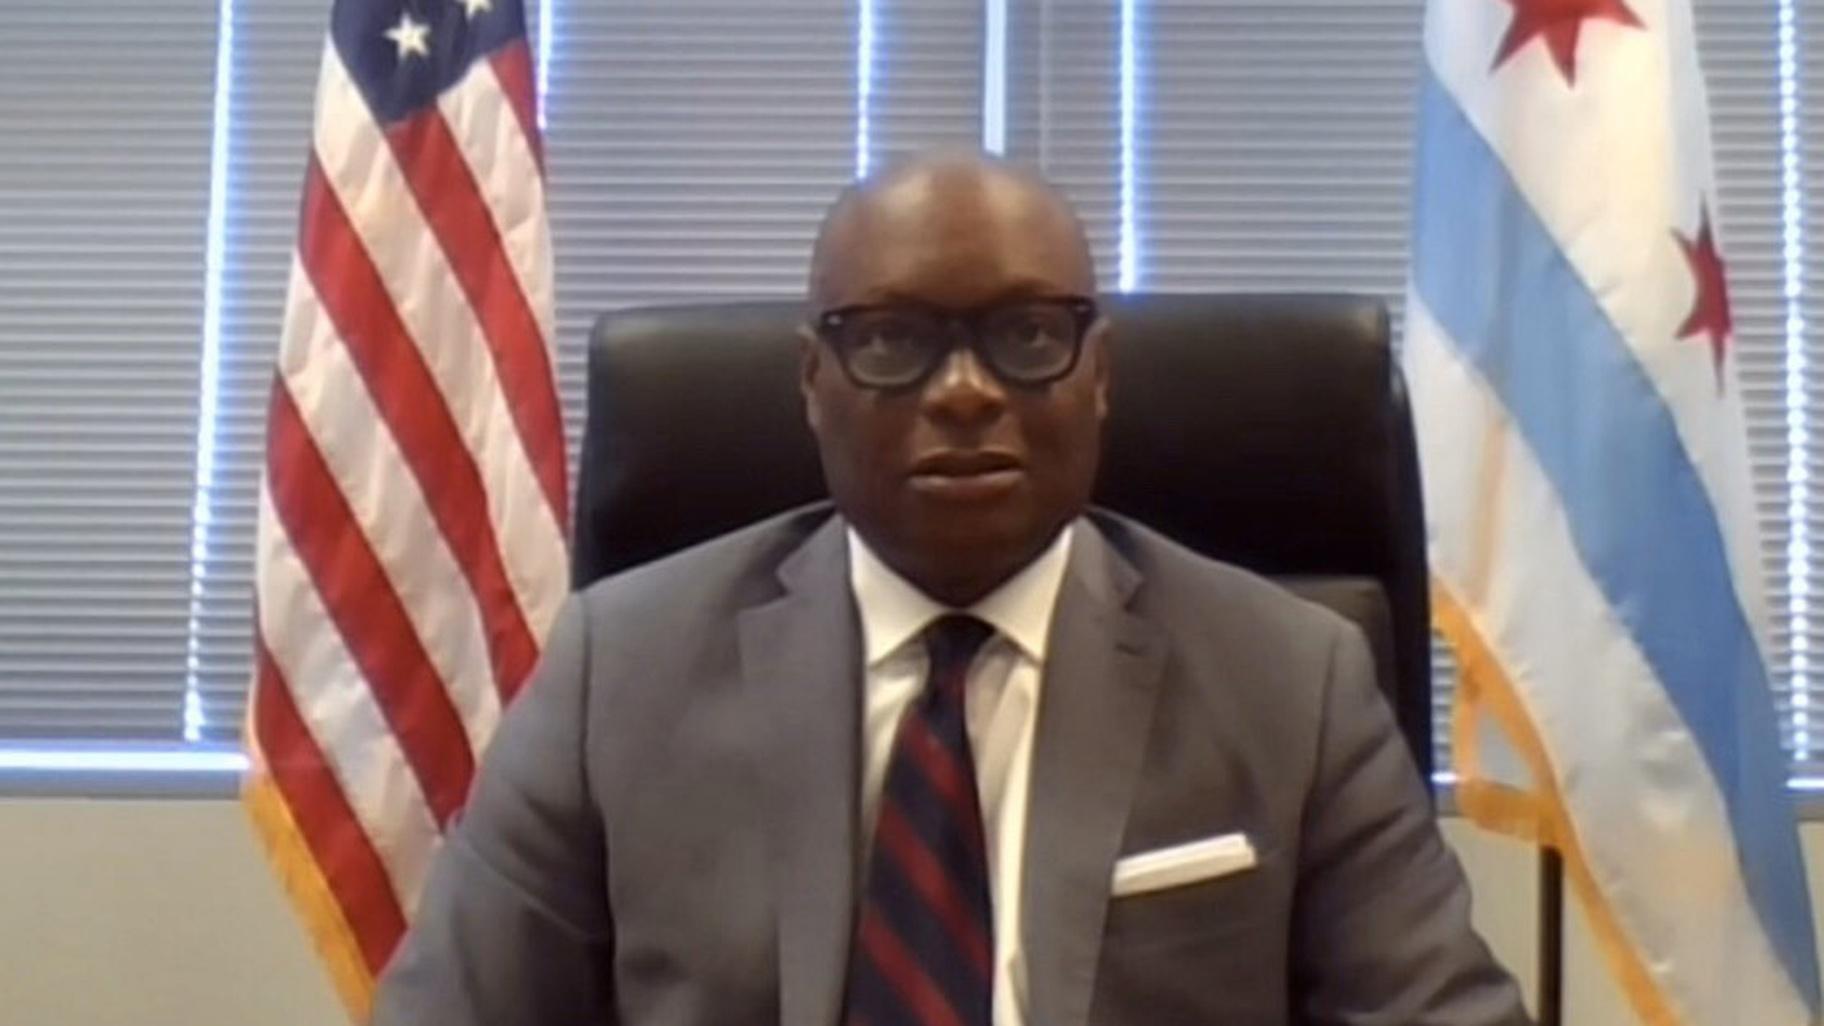 Acting Chicago Police Superintendent David Brown attends a virtual Chicago City Council committee meeting on Monday, April 20, 2020. (WTTW News via City of Chicago)